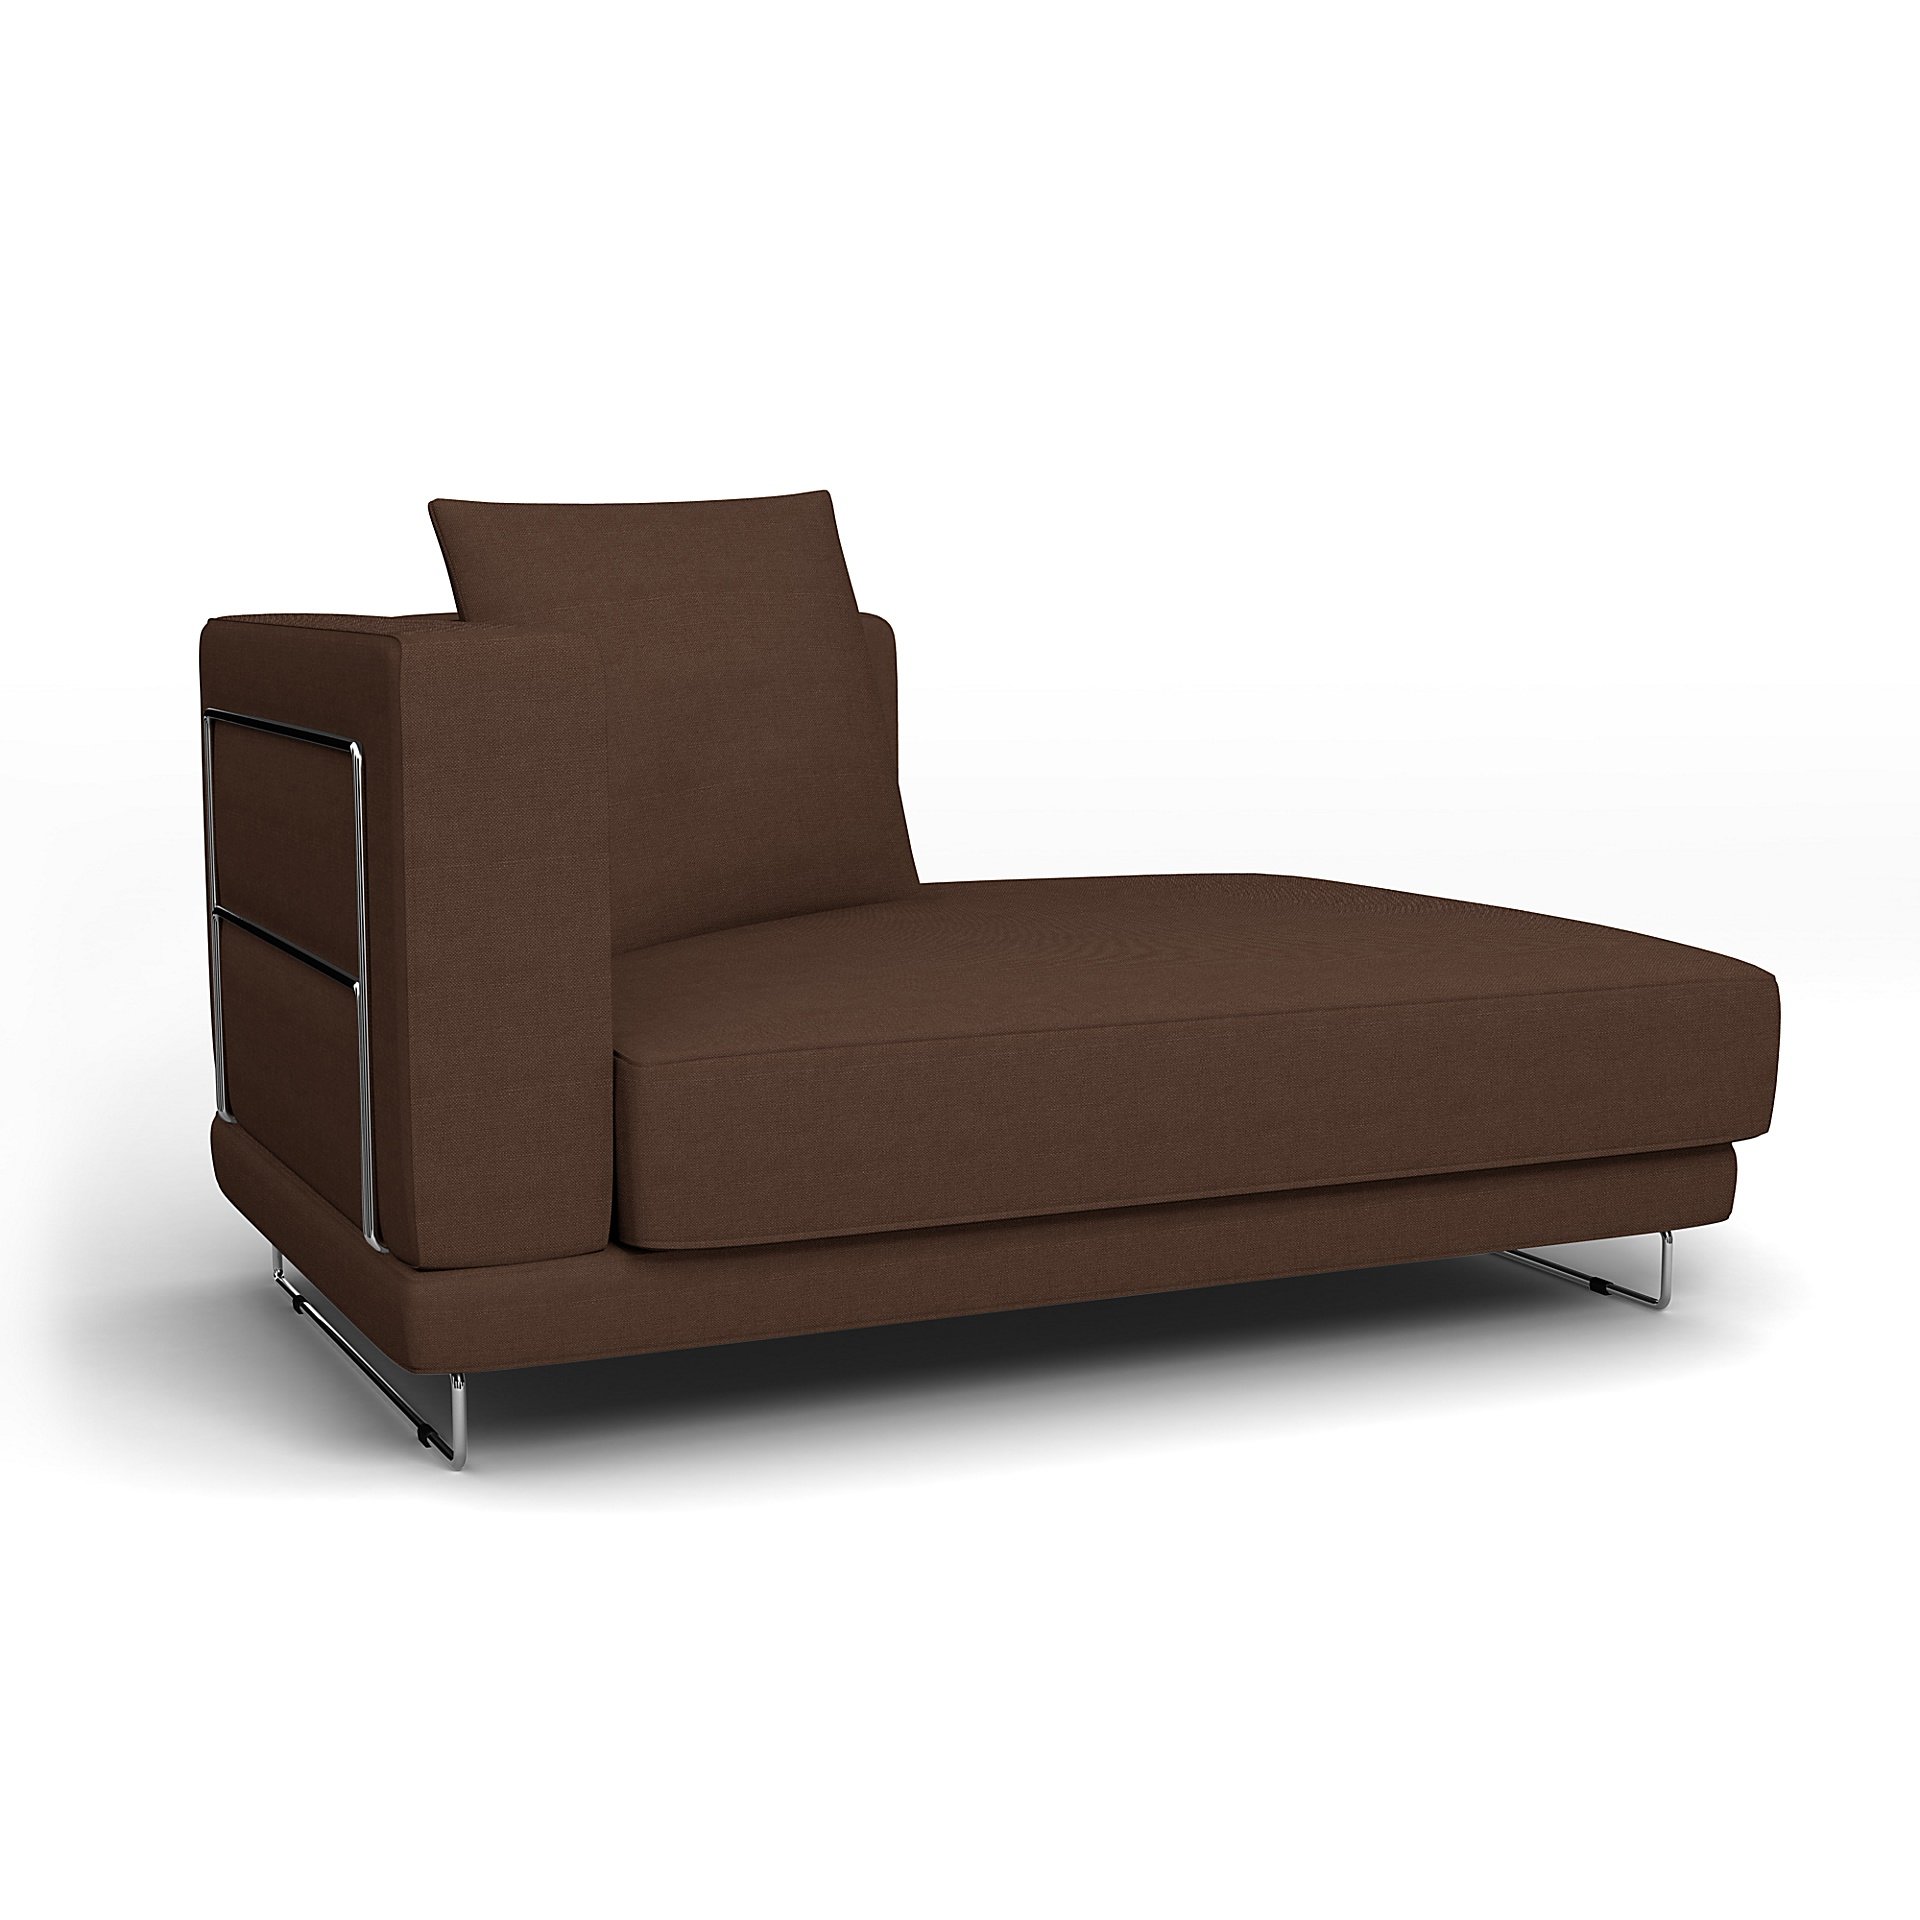 IKEA - Tylosand Chaise with Right Armrest Cover, Chocolate, Linen - Bemz